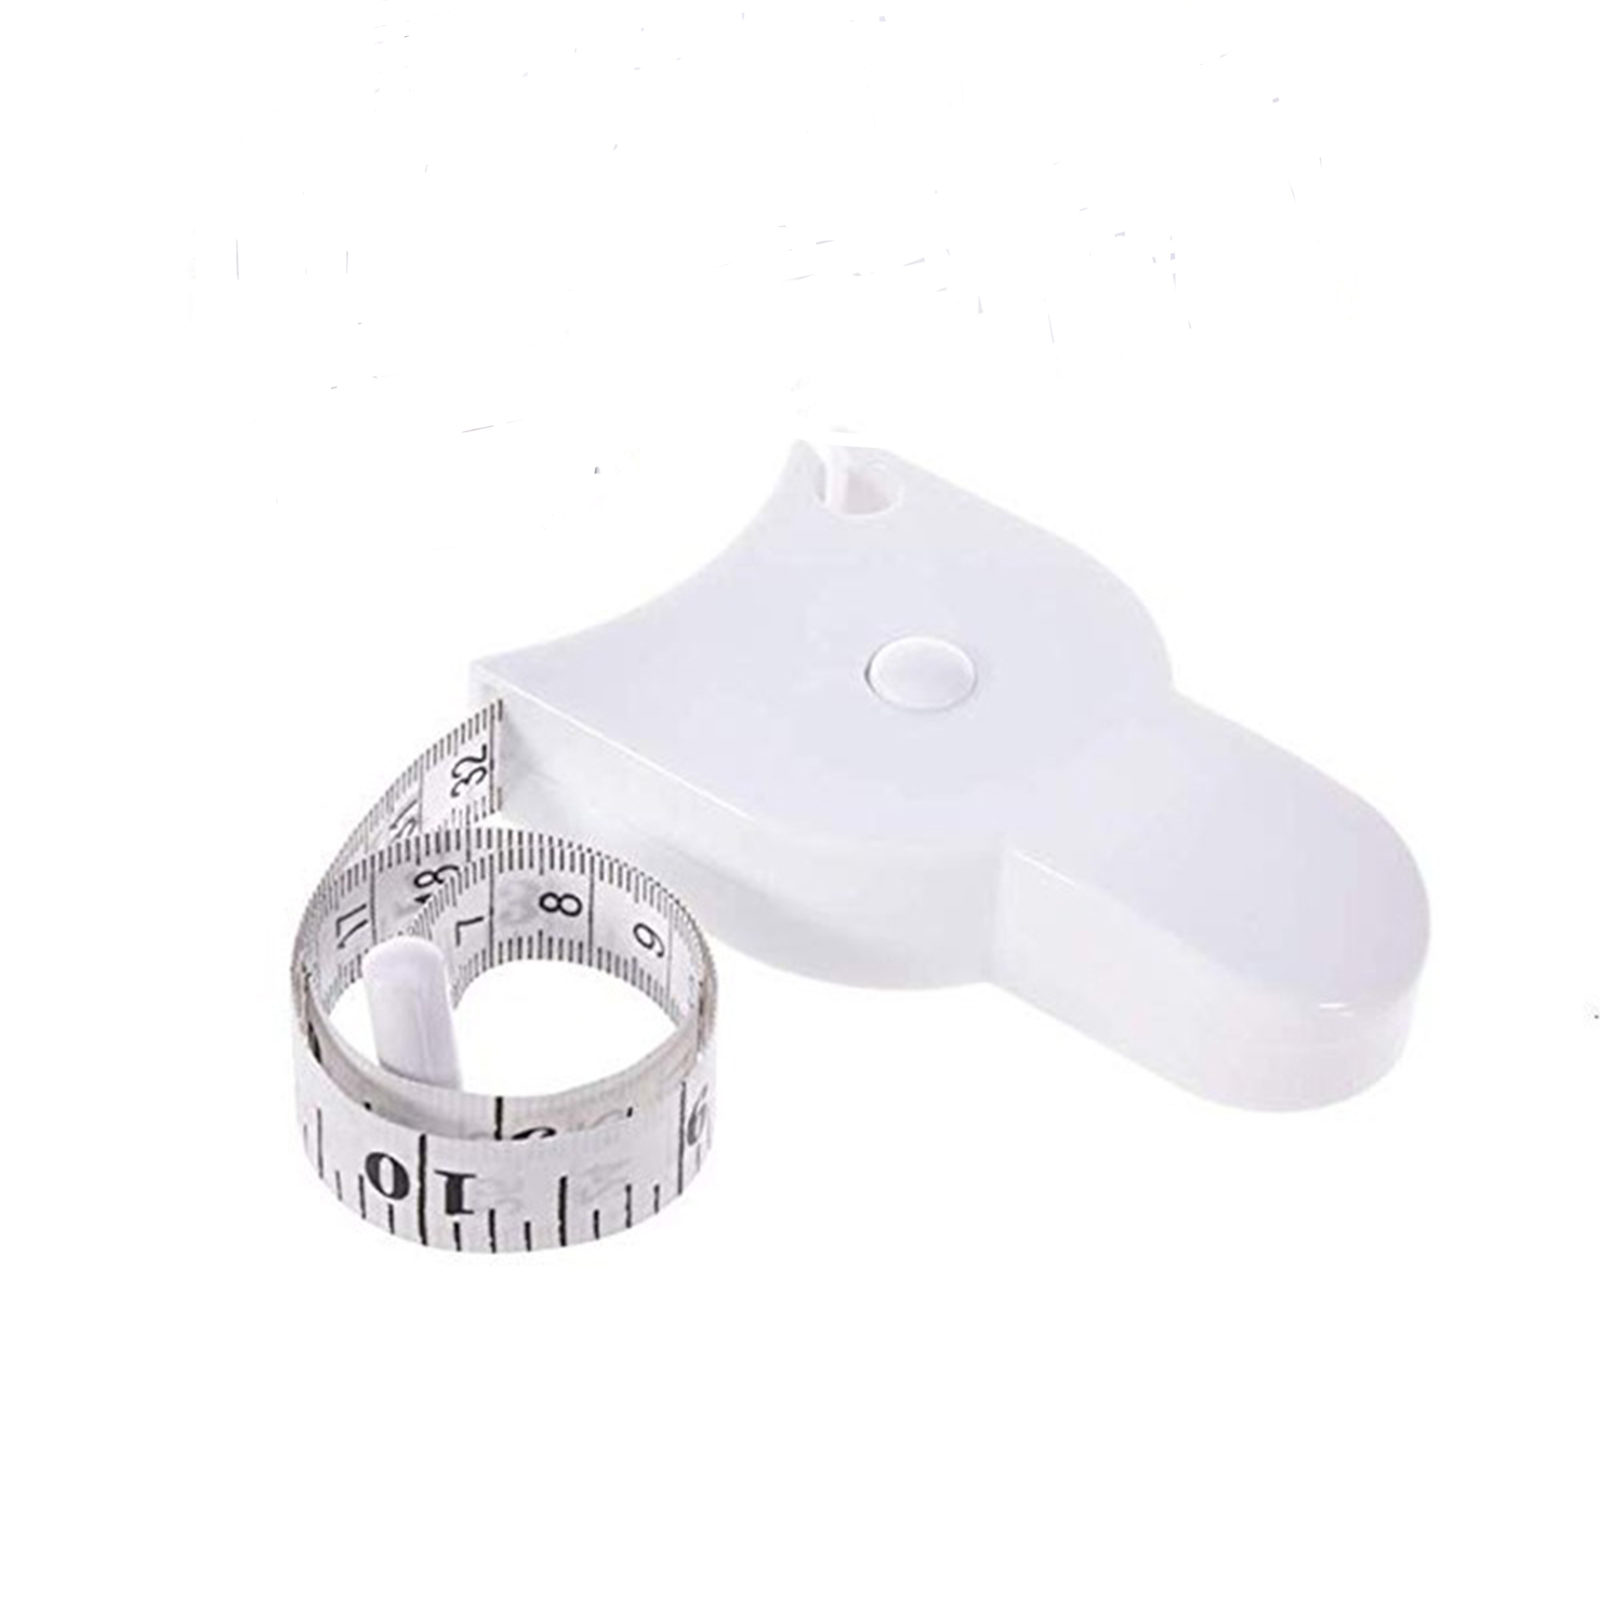 Cartburg Retractable Accurate Waist Measuring Tape Automatic Body